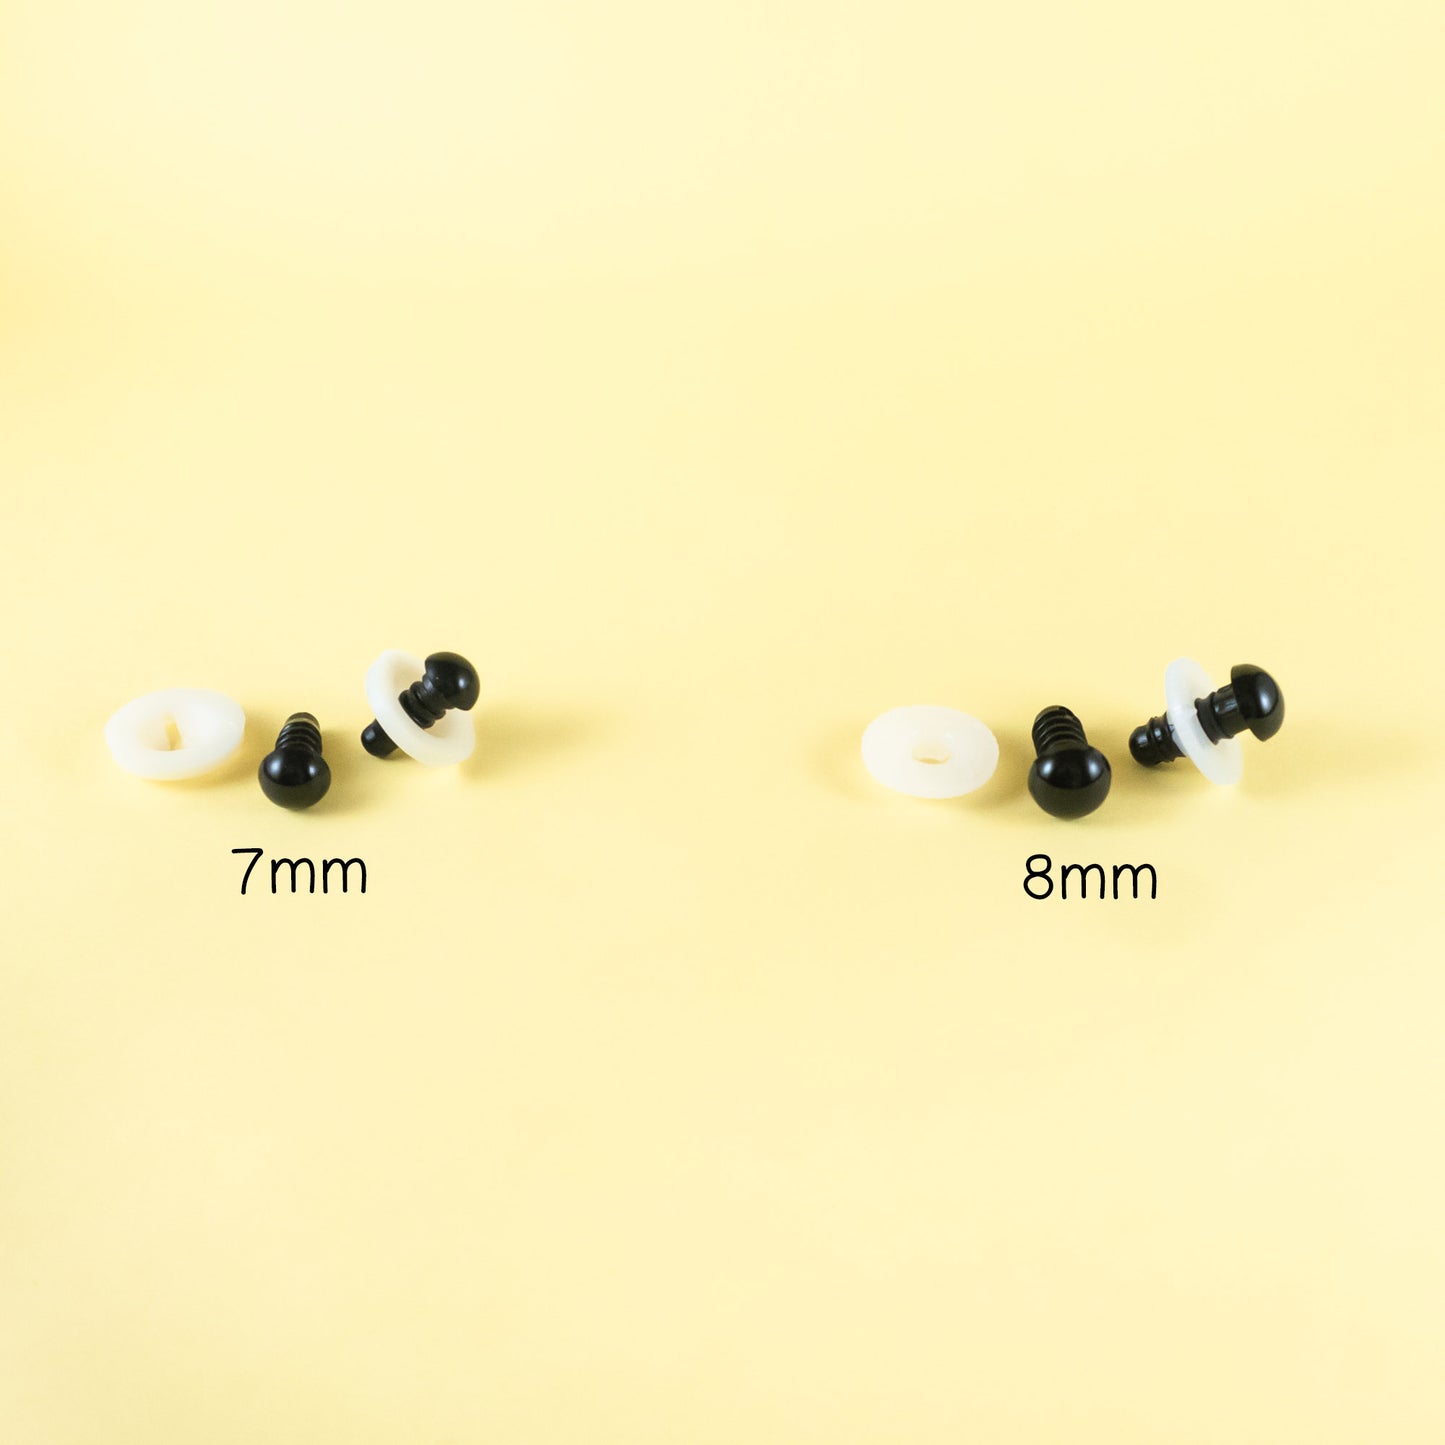 7mm and 8mm safety eyes for amigurumi, teddy bears and puppet